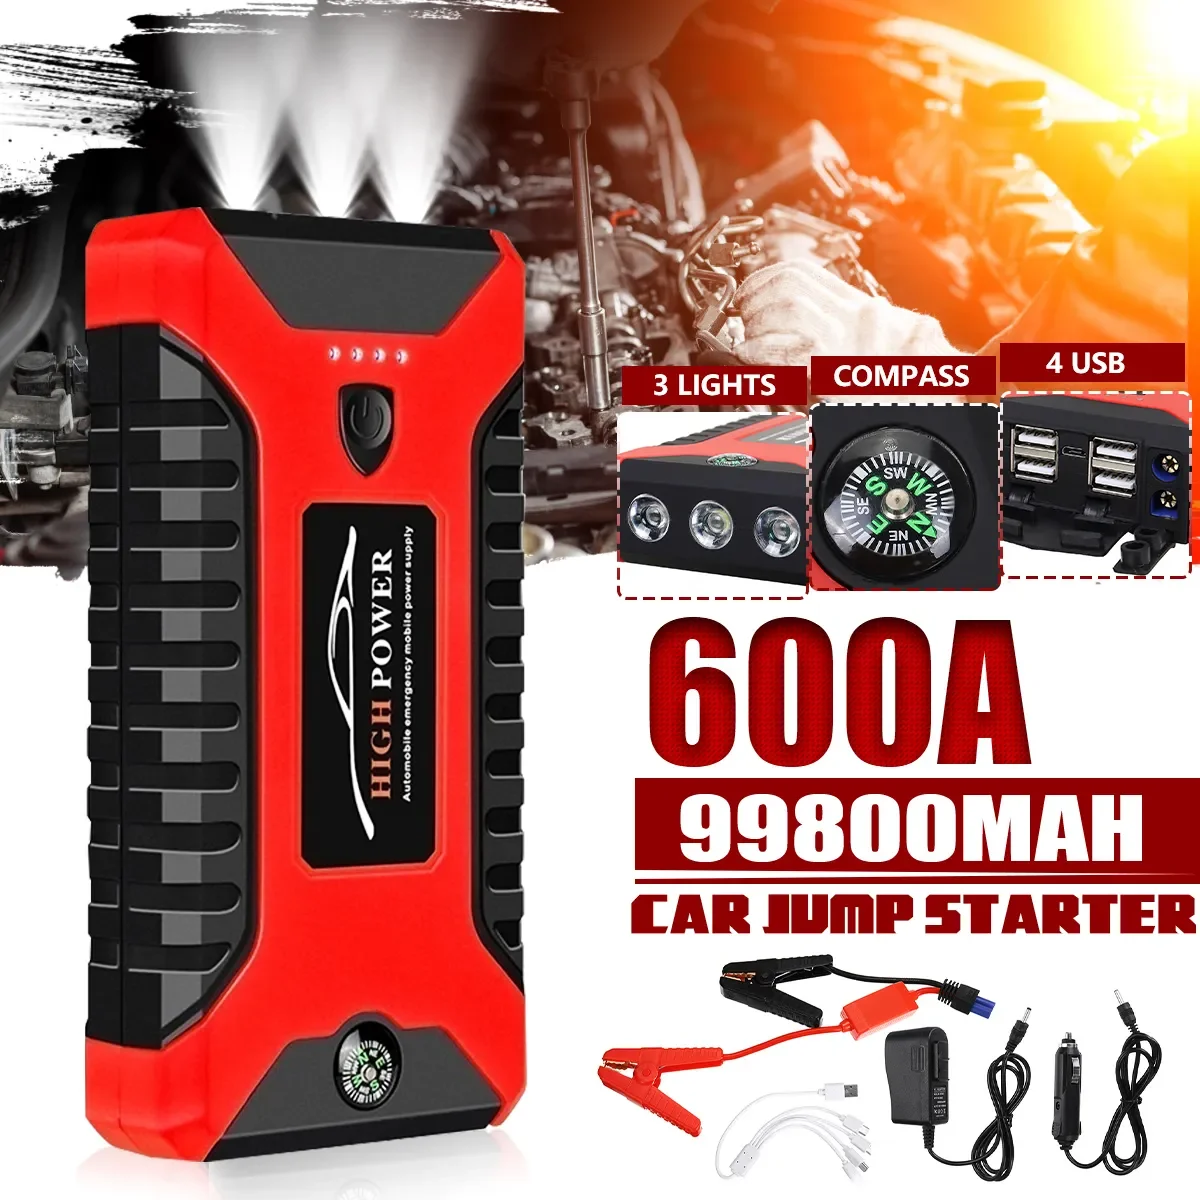 

Car Jump Starter Pack 600A Portable 4 USB Power Bank Car Battery Booster Charger 12V Starting Device Car Startee Buster